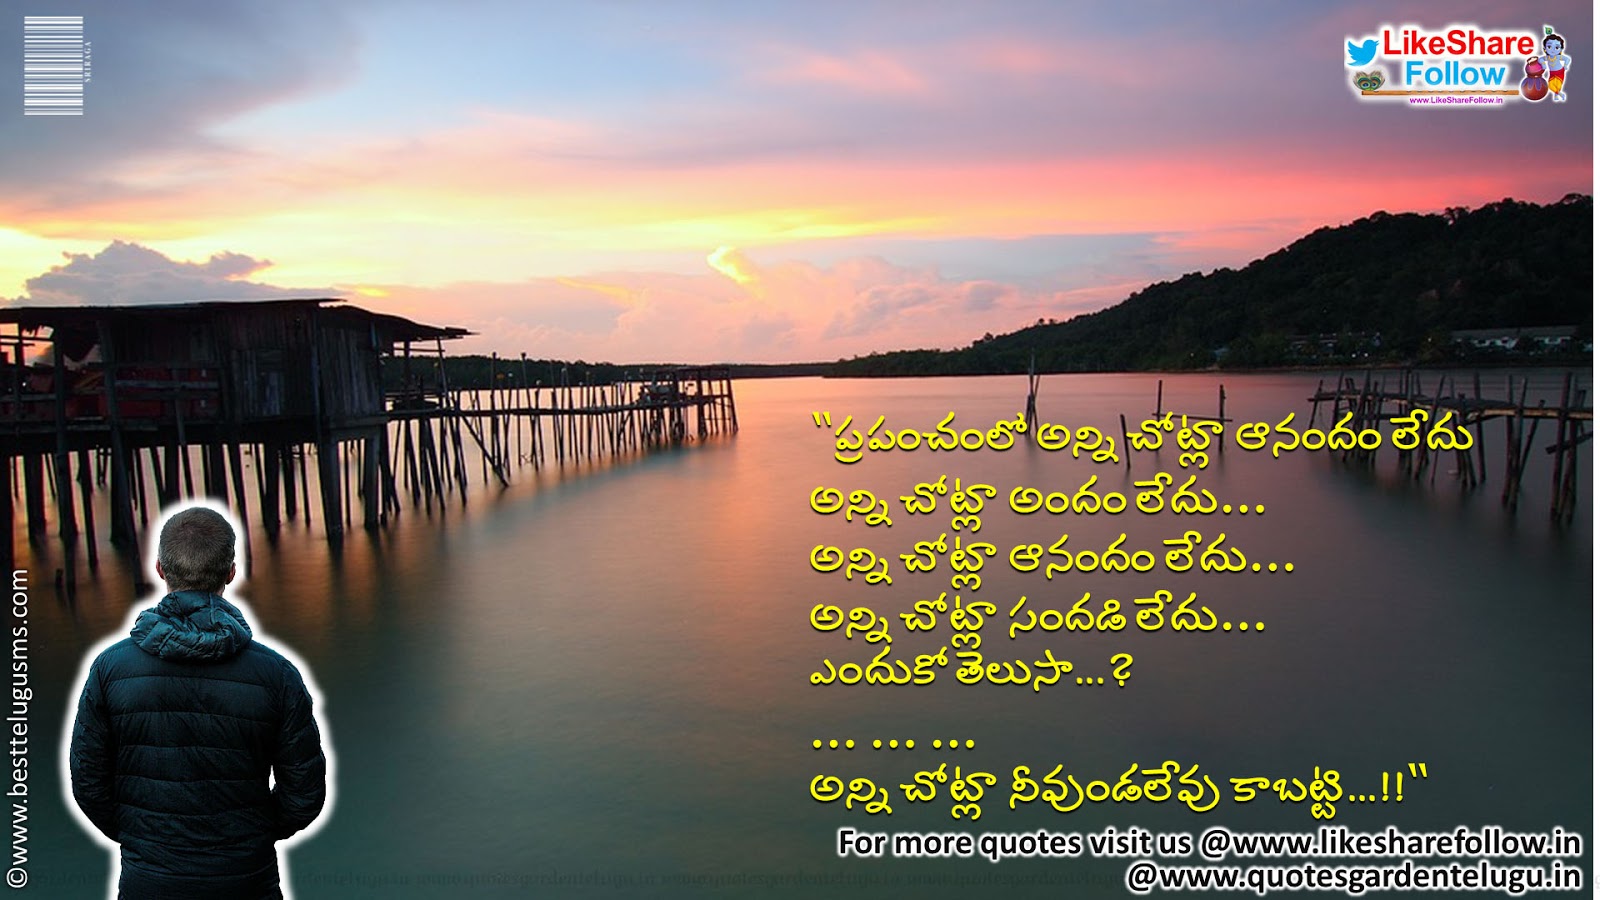 love quotes in telugu with english translation | QUOTES GARDEN ...